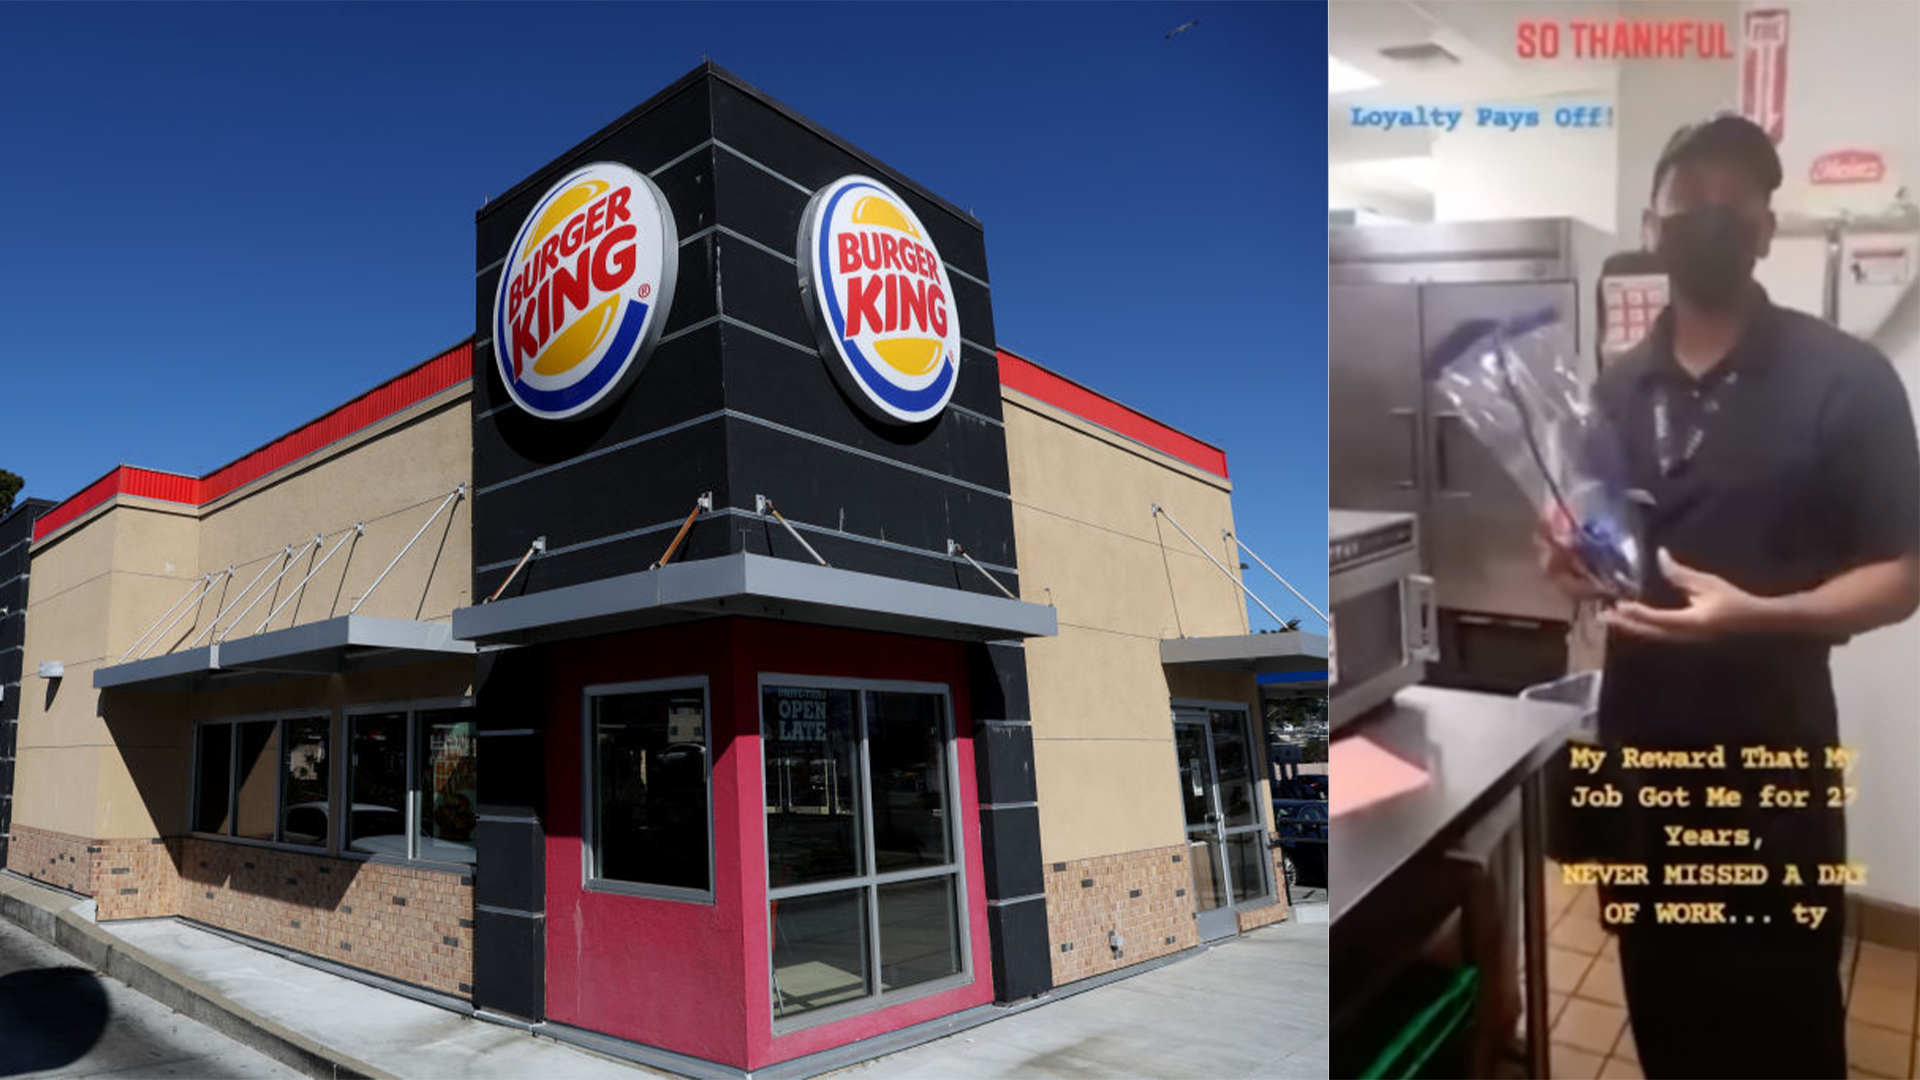 A GoFundMe Shows Gratitude With $200K After A Burger King Employee Received A Goodie Bag For Not Calling Out For 27 Years